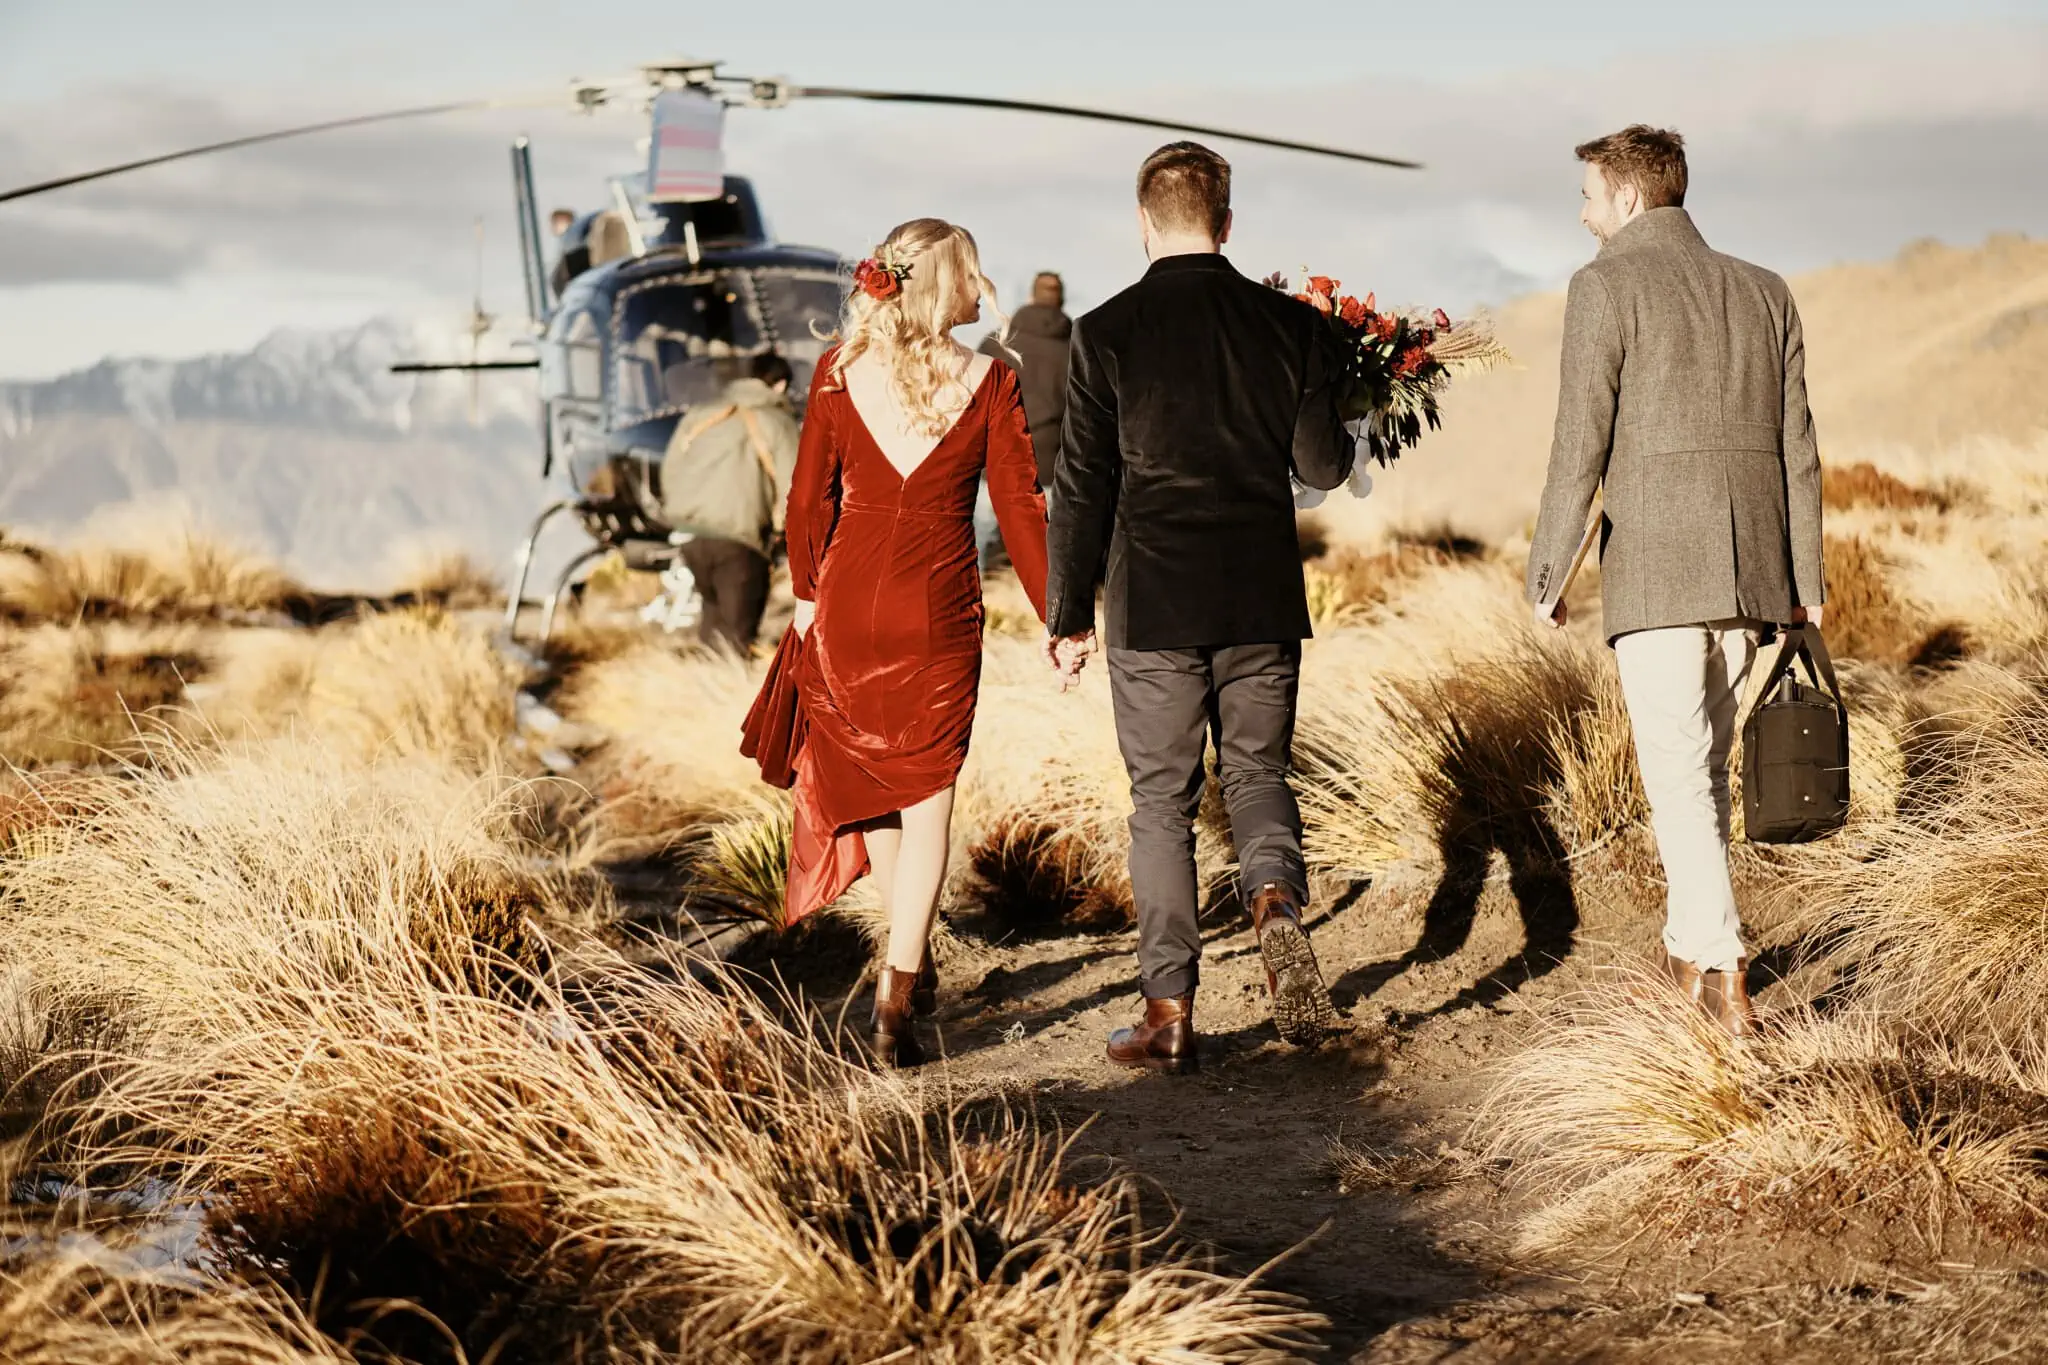 Claire and Rob's Heli Elopement Wedding at Cecil Peak captures them walking down a path with a helicopter in the background.